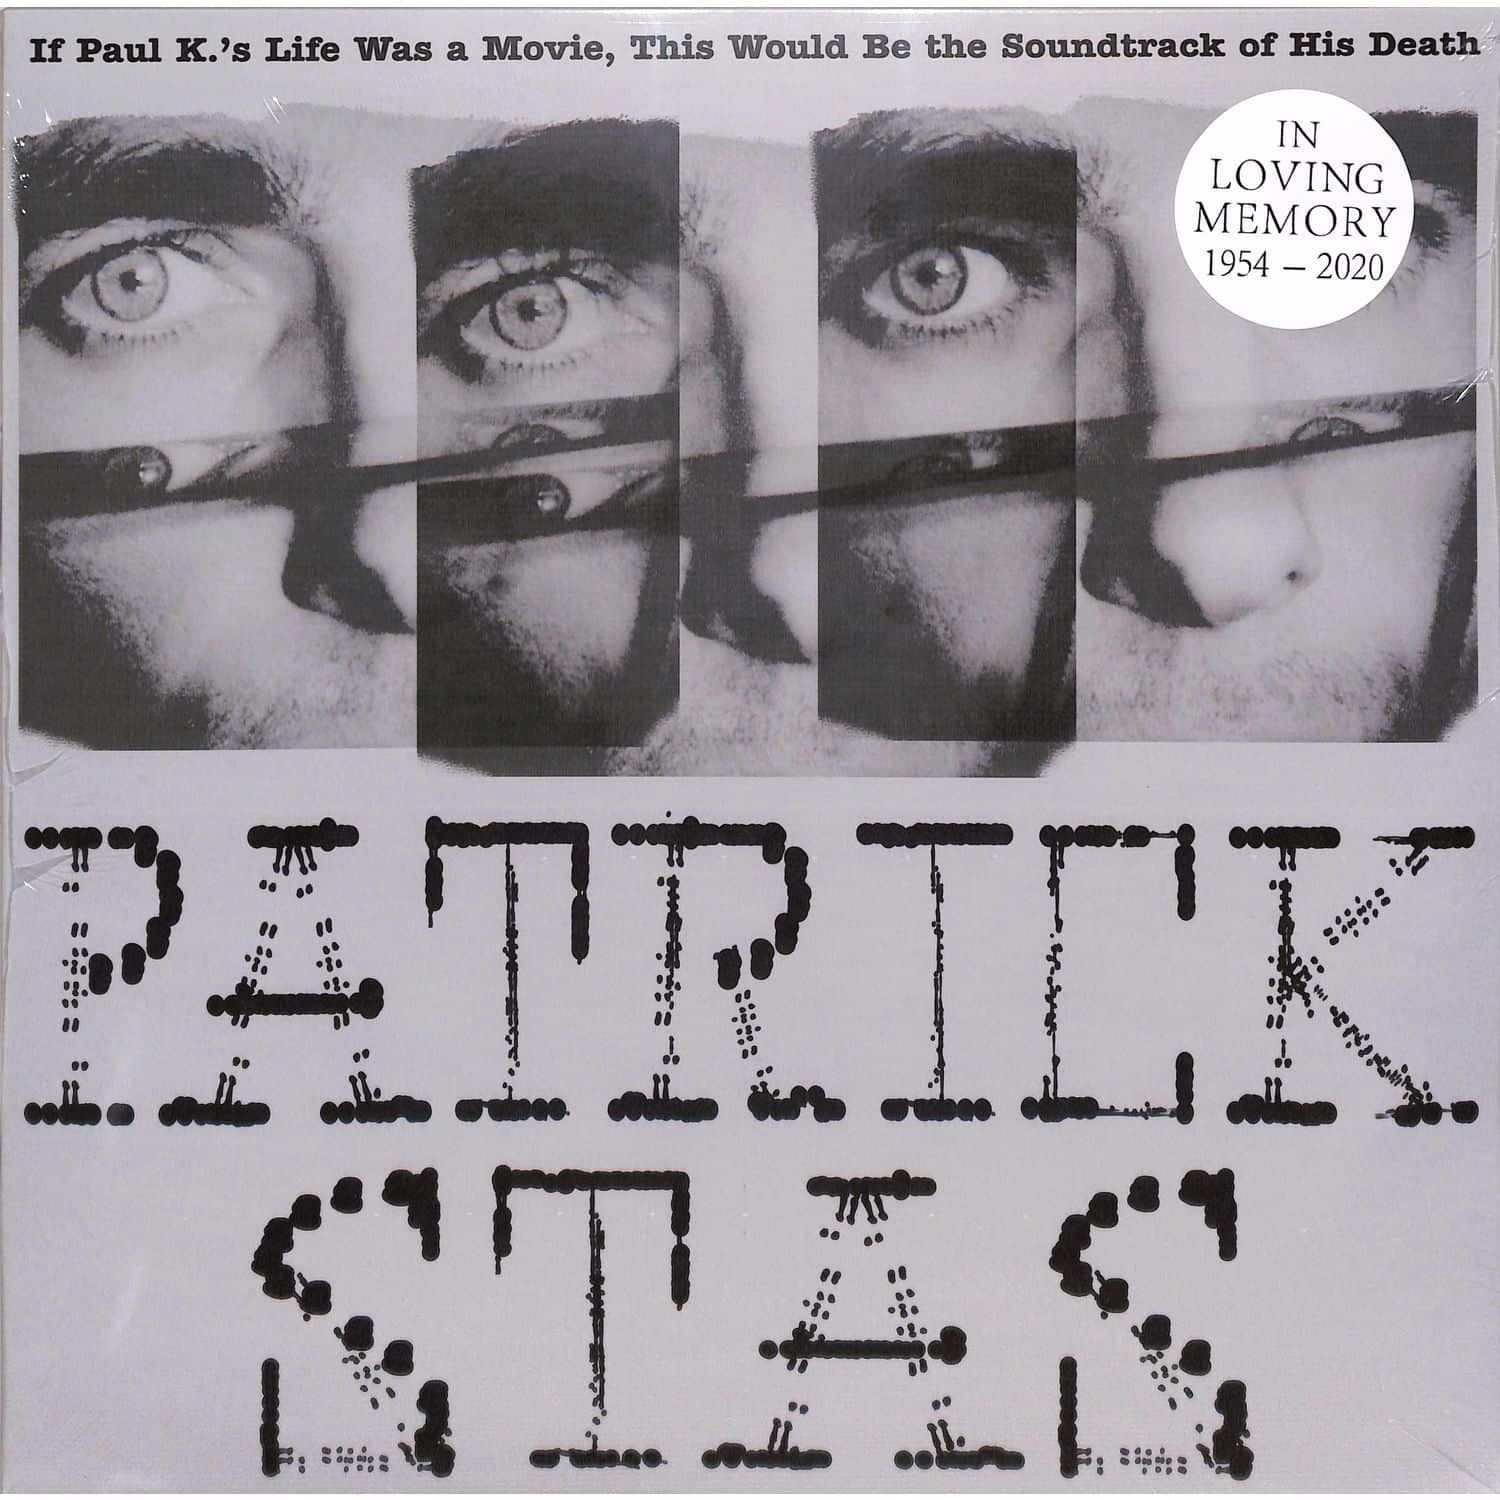 Patrick Stas - IF PAUL K.S LIFE WAS A MOVIE, THIS WOULD BE THE SOUNDTRACK OF HIS DEATH